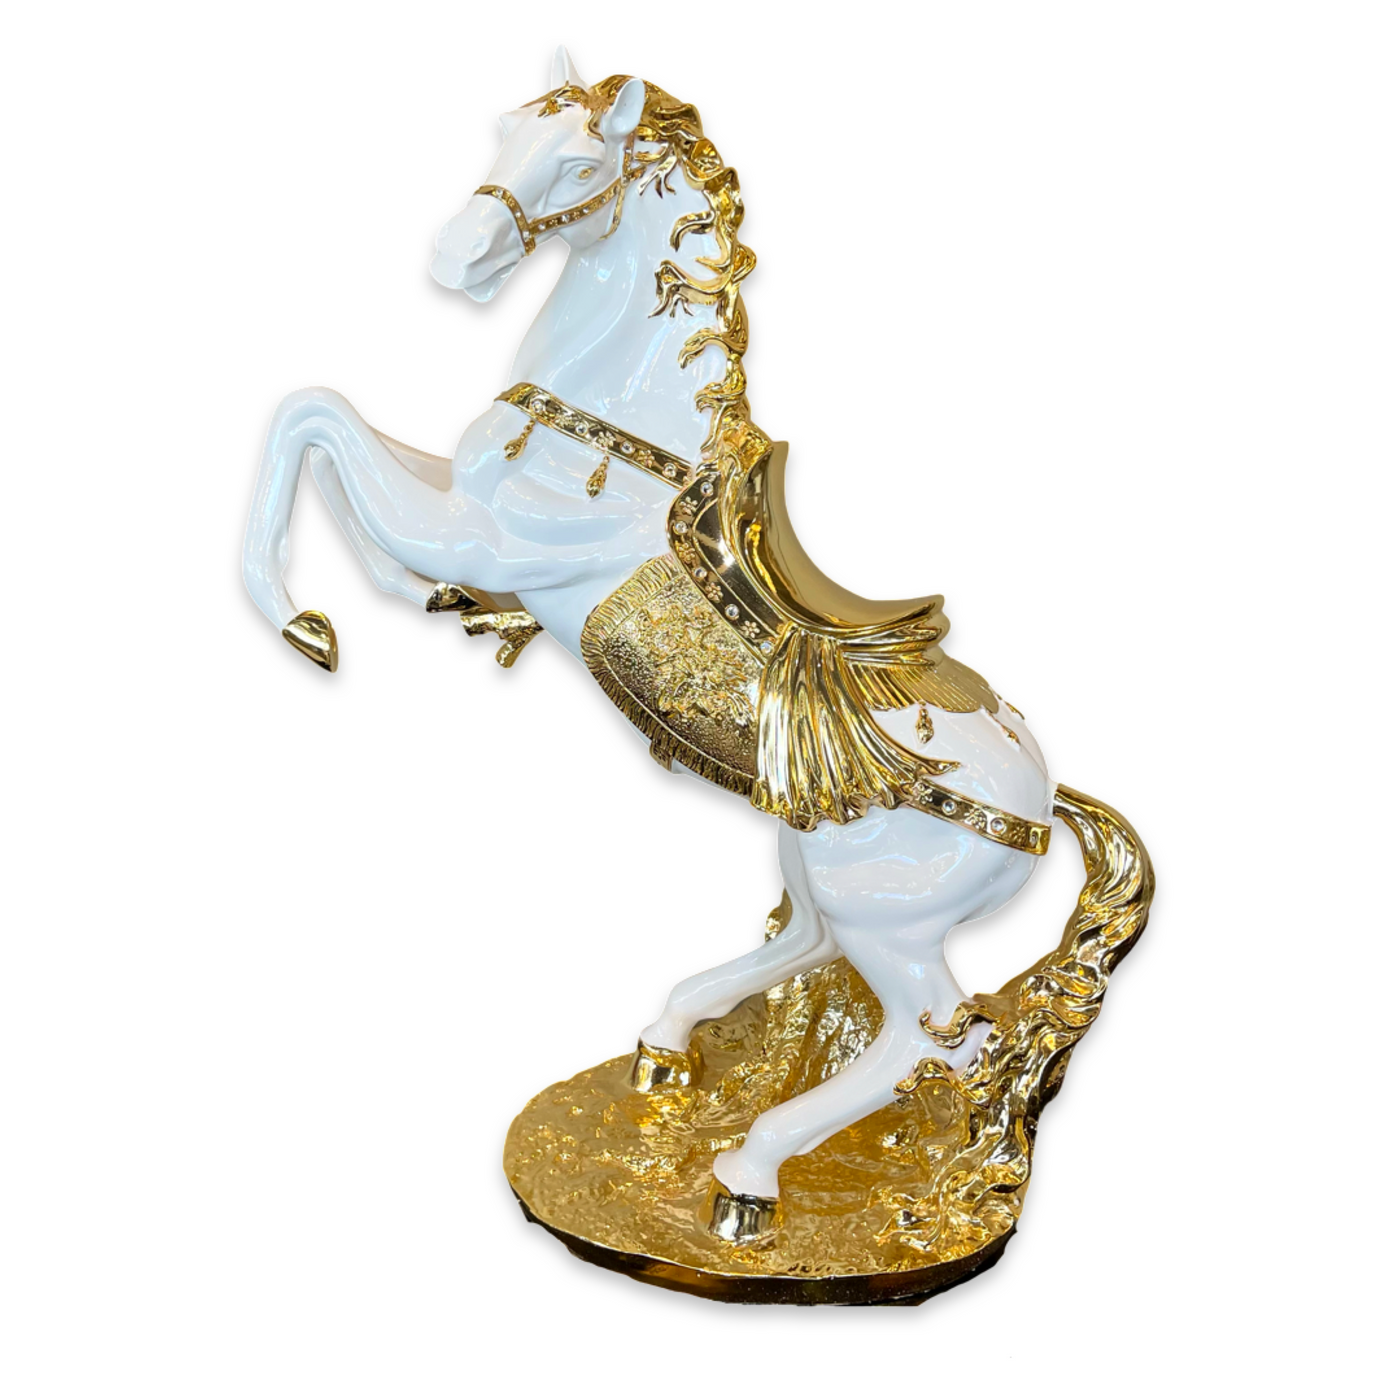 Large Horse Statue (White/Gold)